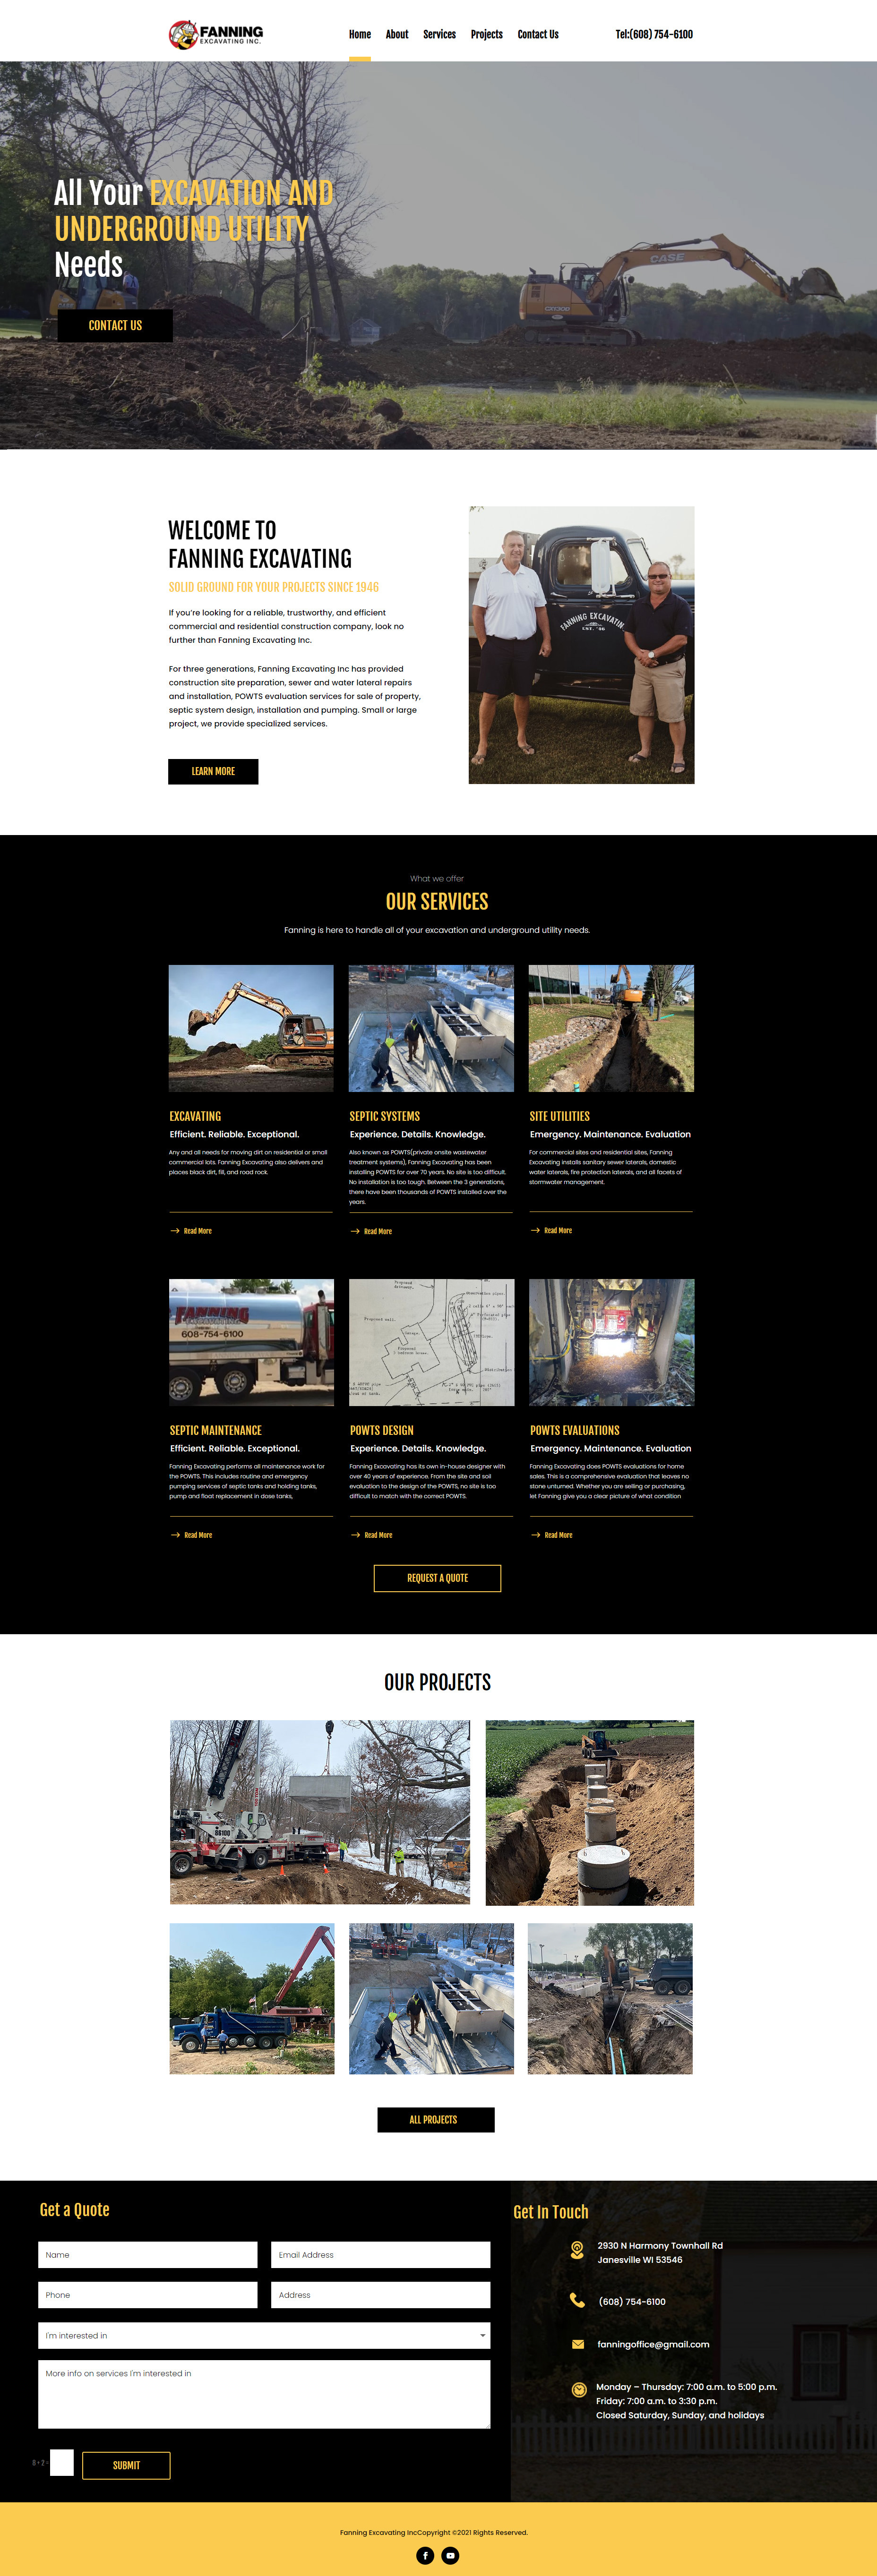 Example of the new and improved WordPress website designed by Foremost Media for Fanning Excavating, INC.